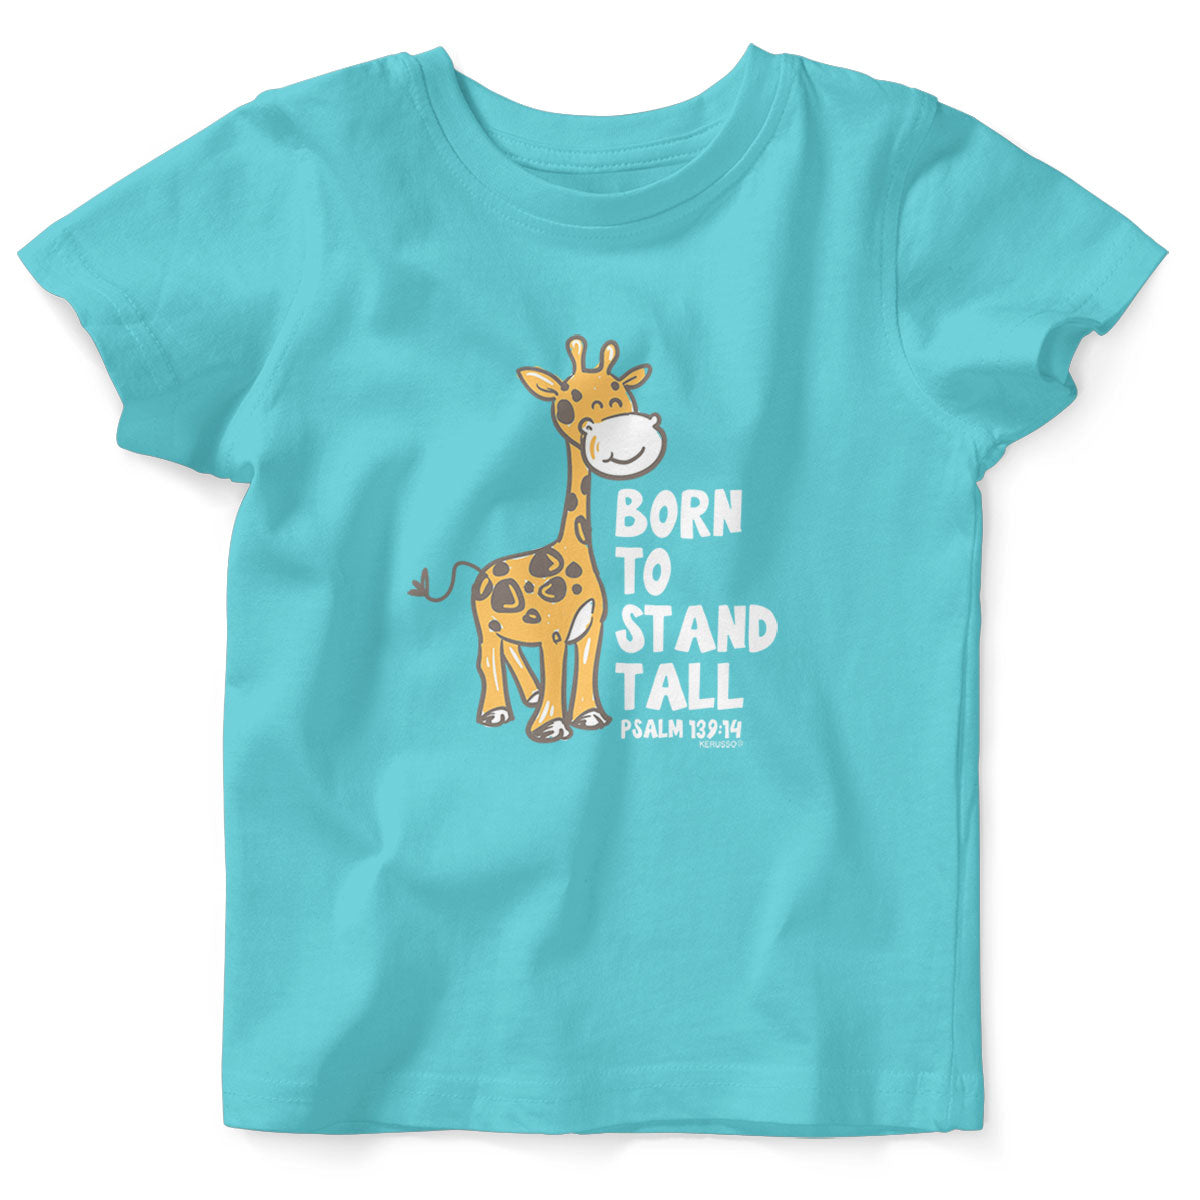 Kerusso Baby T-Shirt Born To Stand Tall